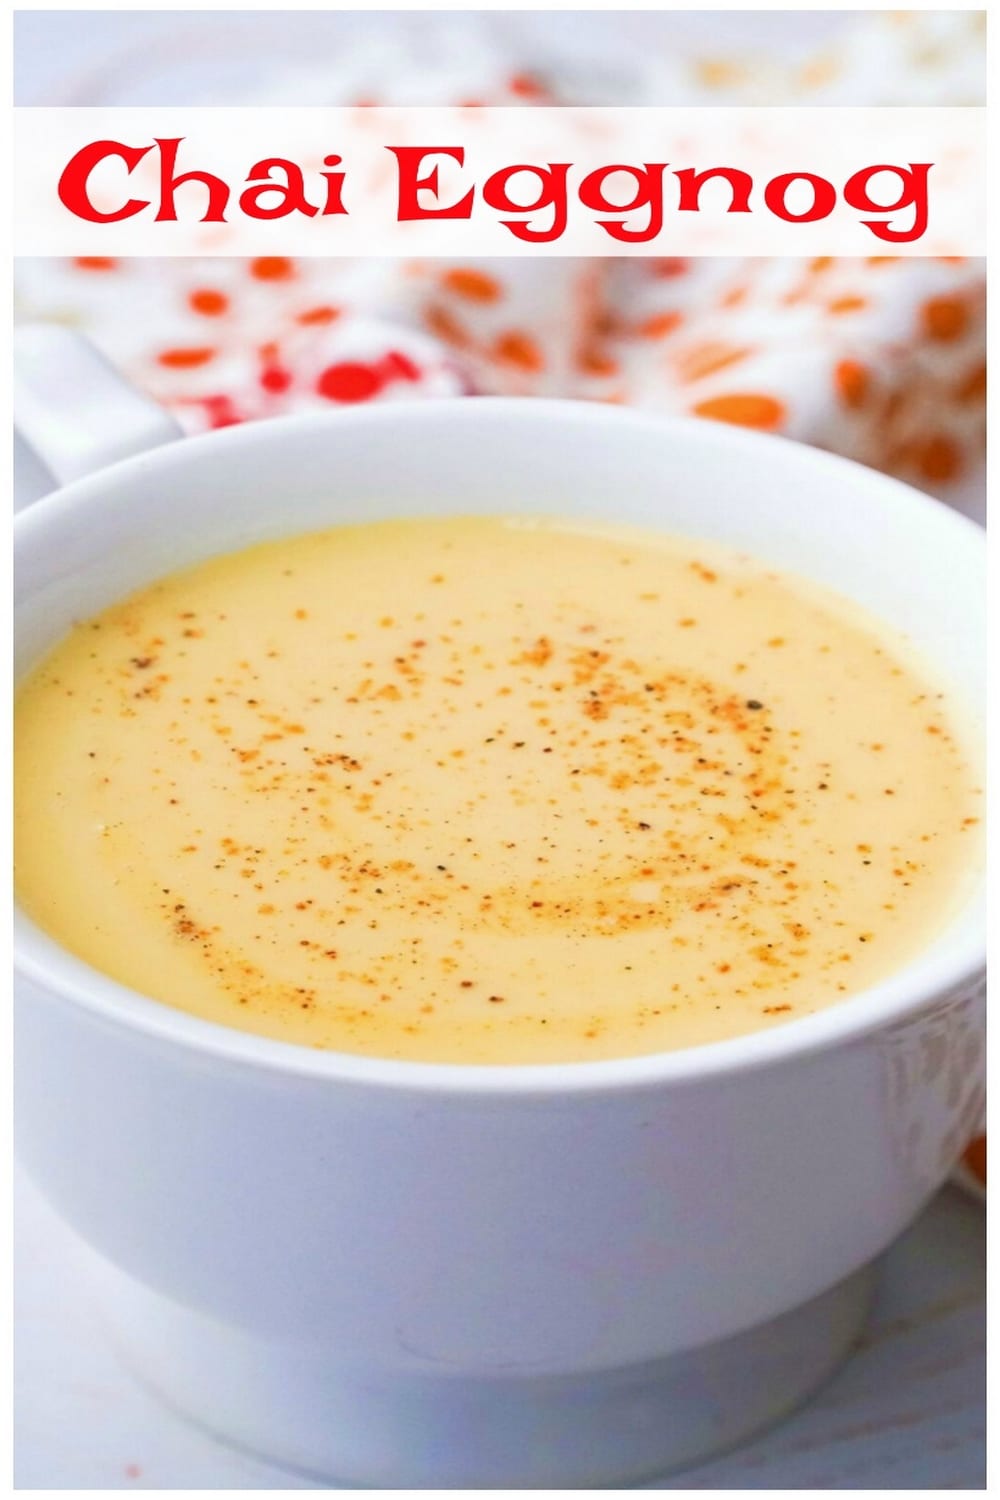 If you love the flavors of chai and have a weakness for eggnog, this homeade Chai Eggnog is the ultimate holiday sipper. For a spiked version, a generous shot of brandy, whisky or rum added to this delicious, drinkable custard would put everyone into the holiday spirit. #noblepig #chai #chaieggnog #eggnog #holidaydrink #nonalcoholicholidaydrink #chaitea #holidaycocktail #partydrink #christmasdrink #holidaydrinksforacrowd via @cmpollak1